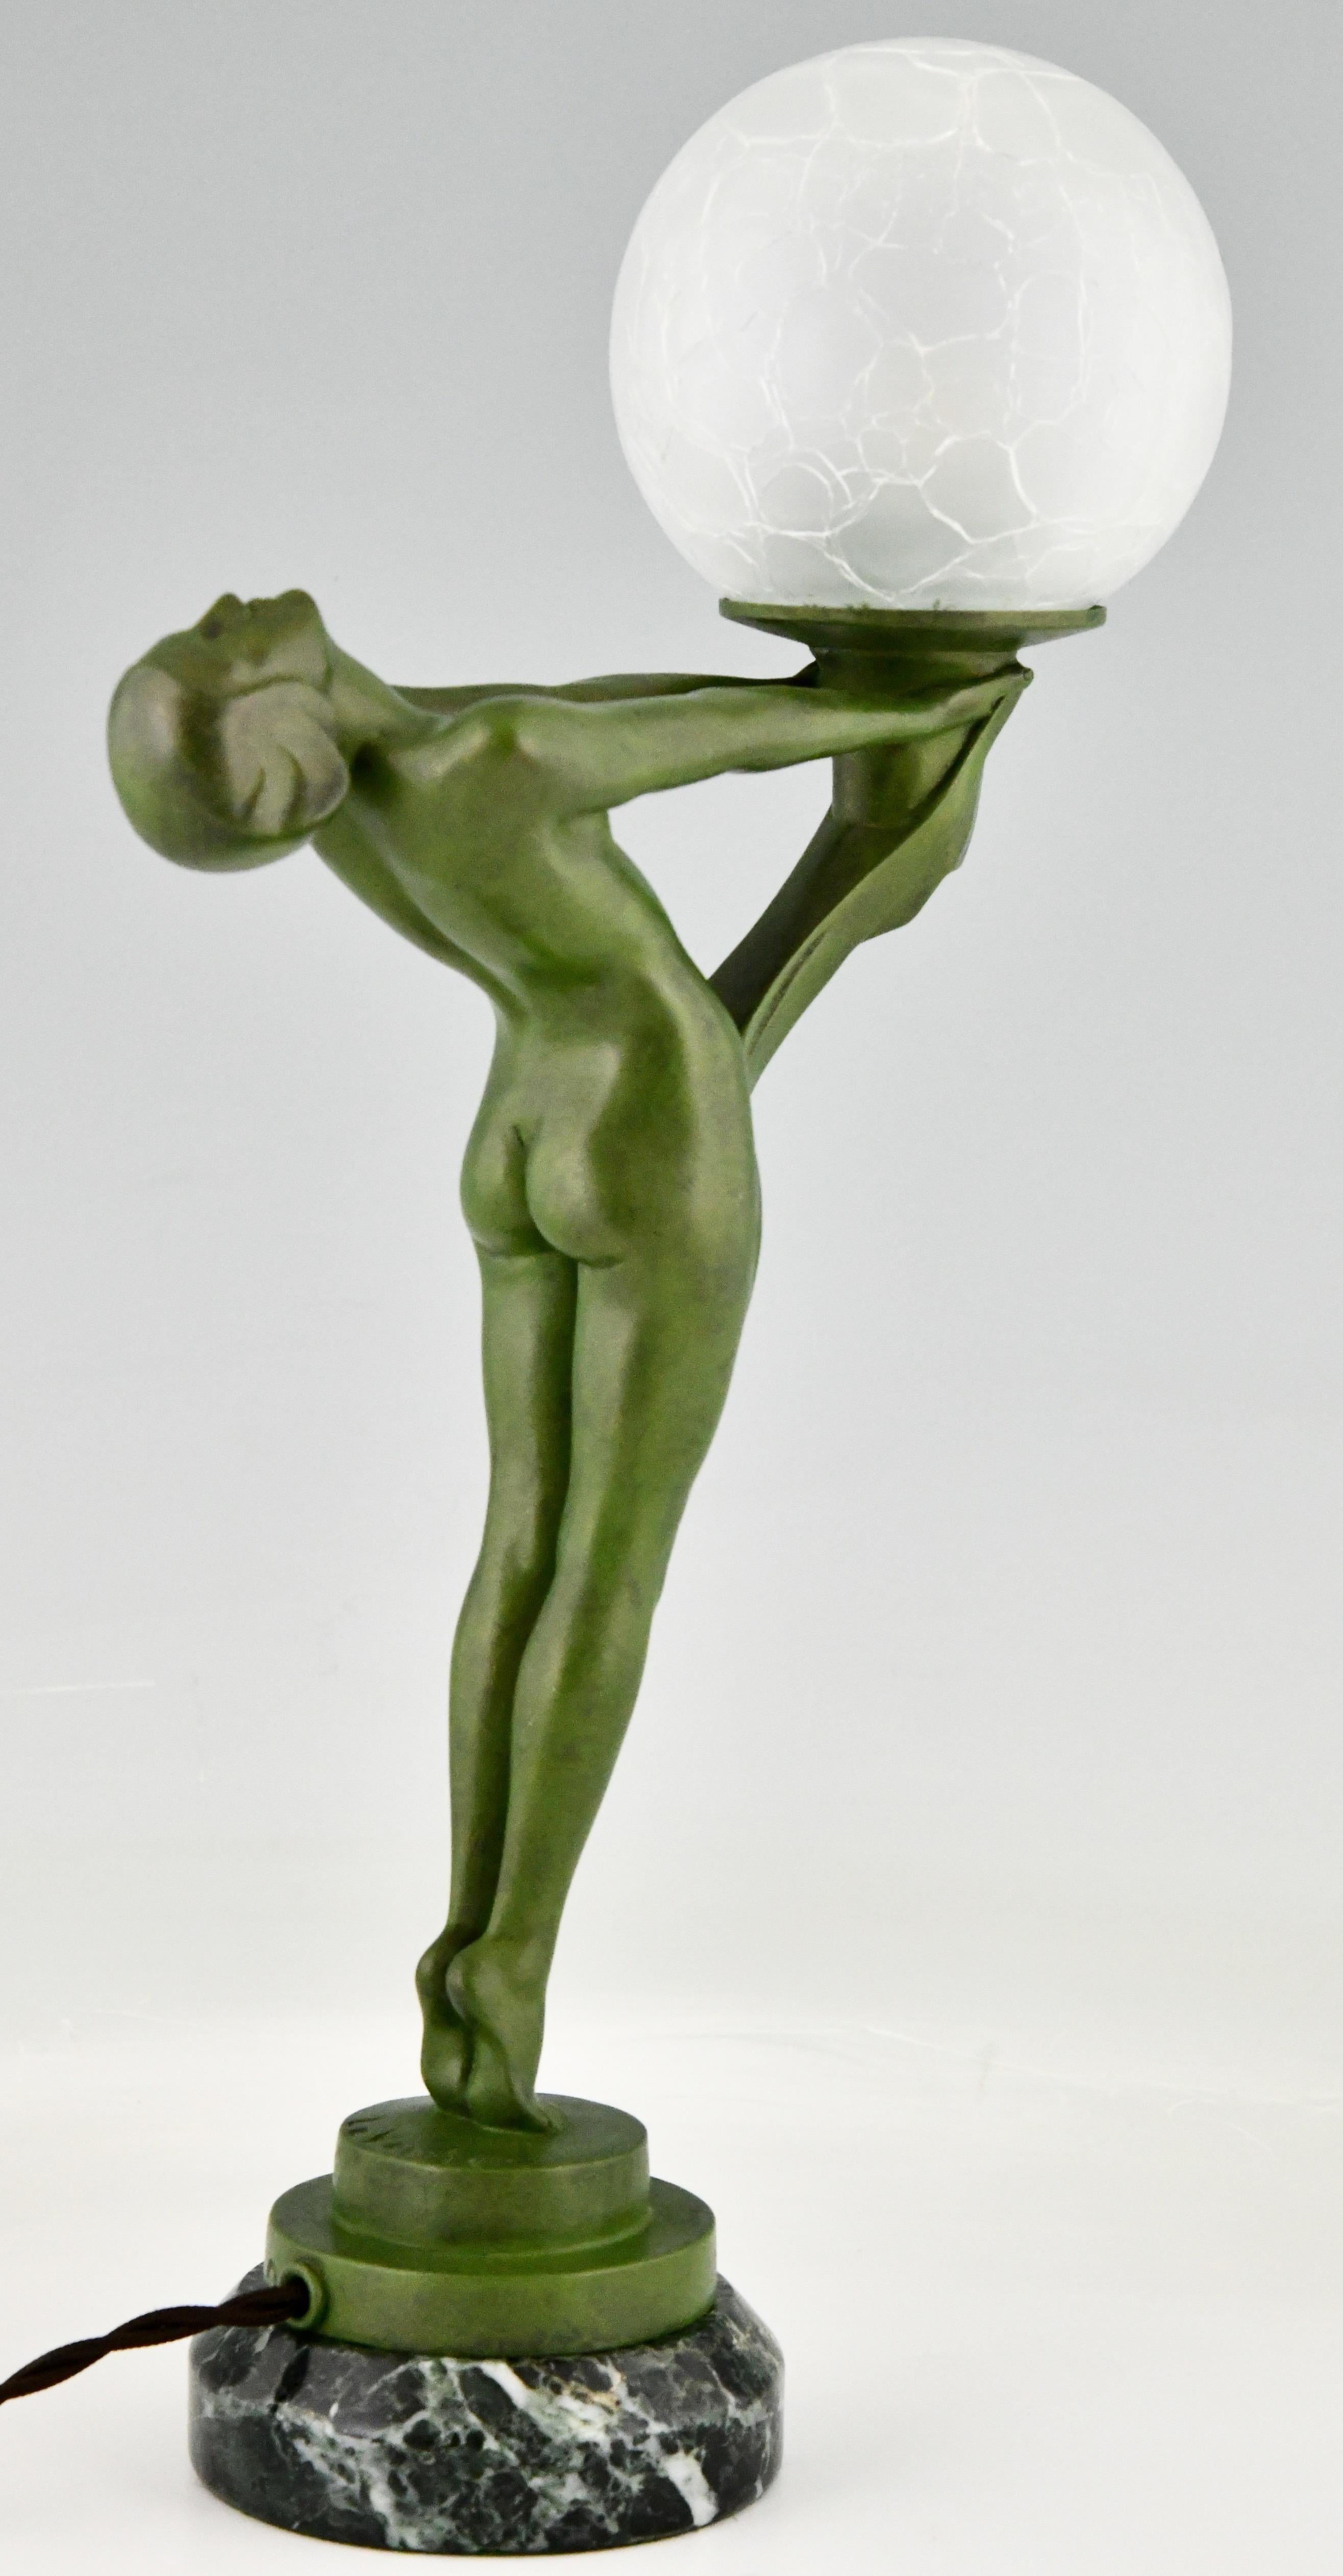 Mid-20th Century Art Deco Lamp Standing Nude with Ball Clarté by Max Le Verrier Original 1930 For Sale